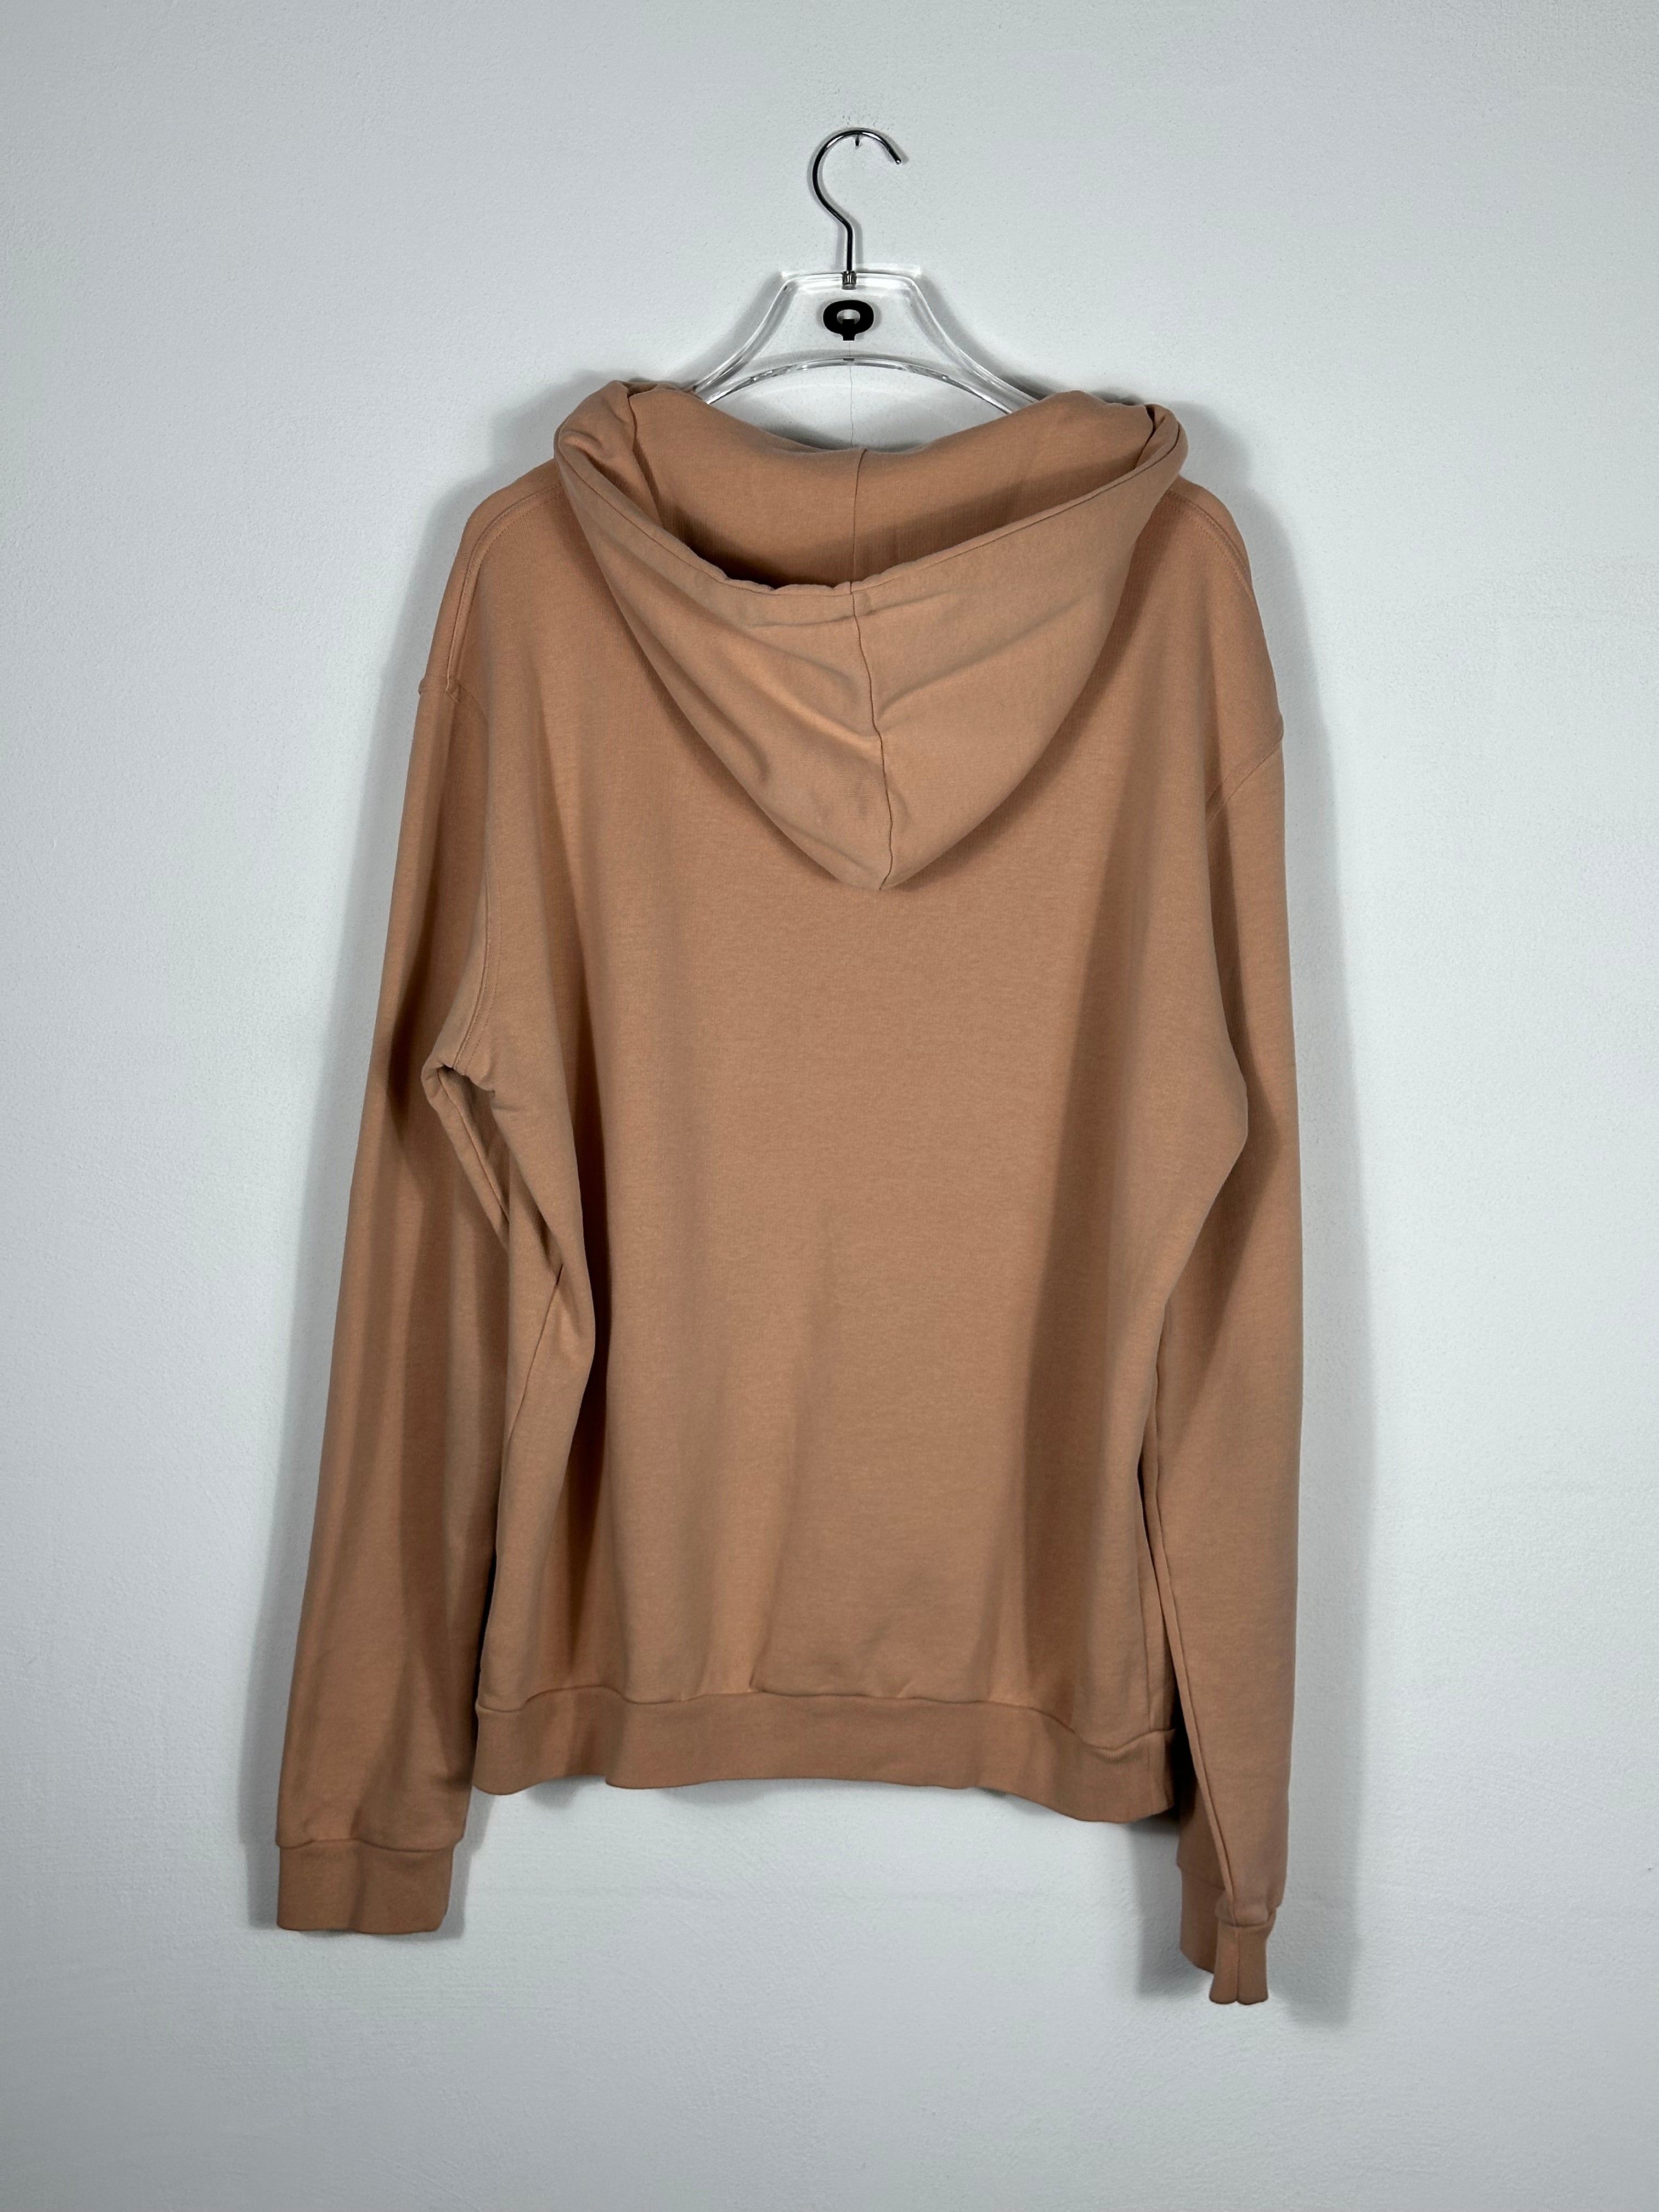 Patched Hoodie by Sfera Ebbasta